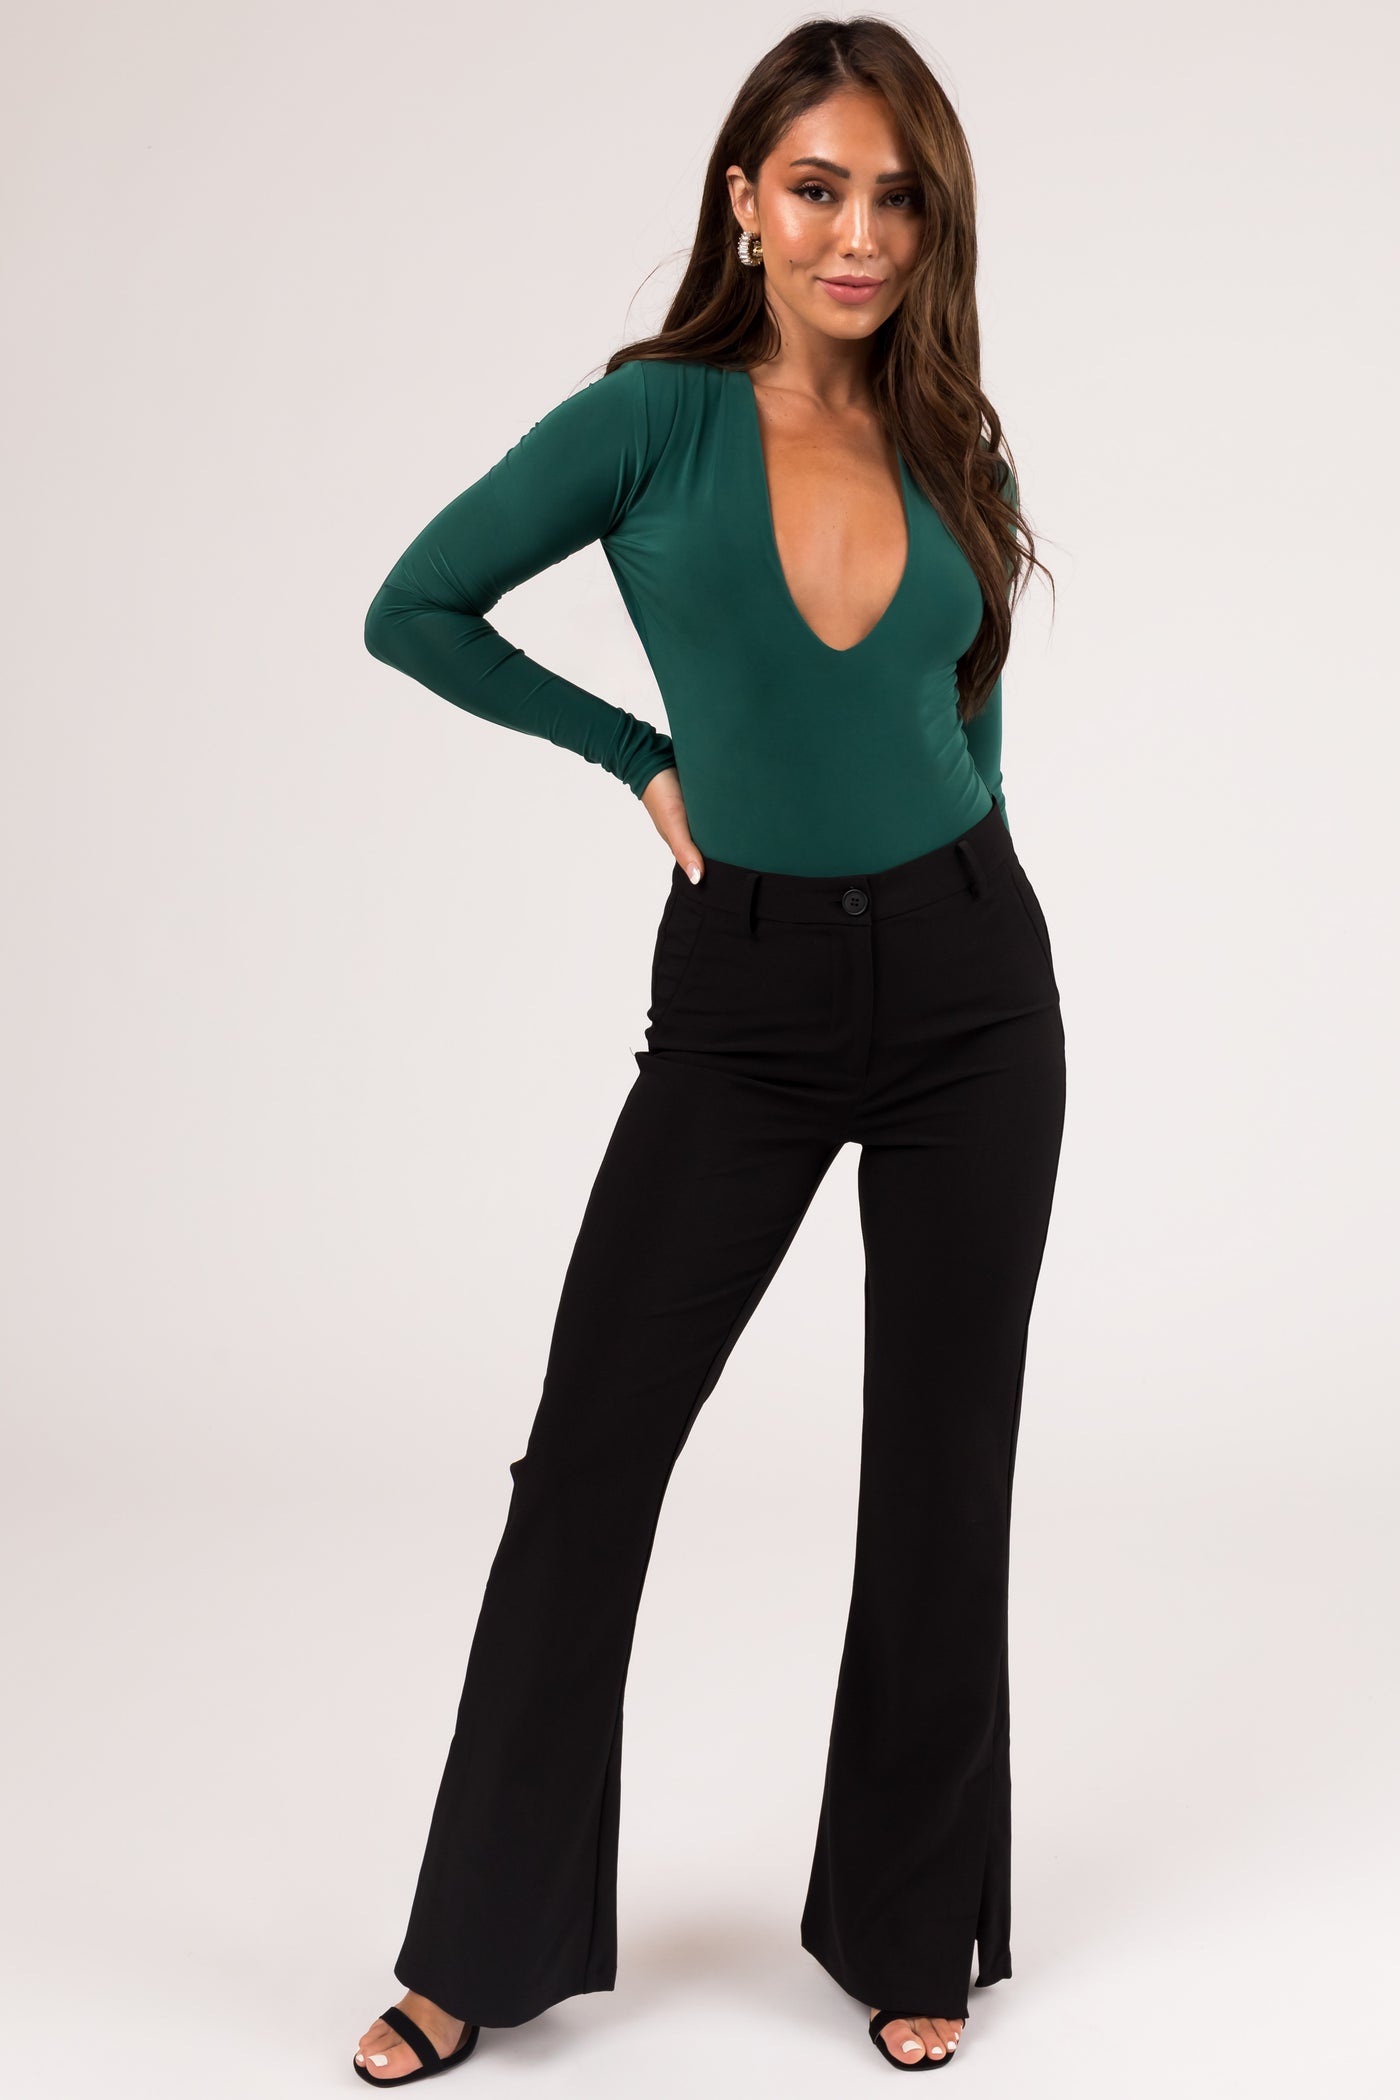 Hunter Green Deep V Bodysuit with Snap Buttons